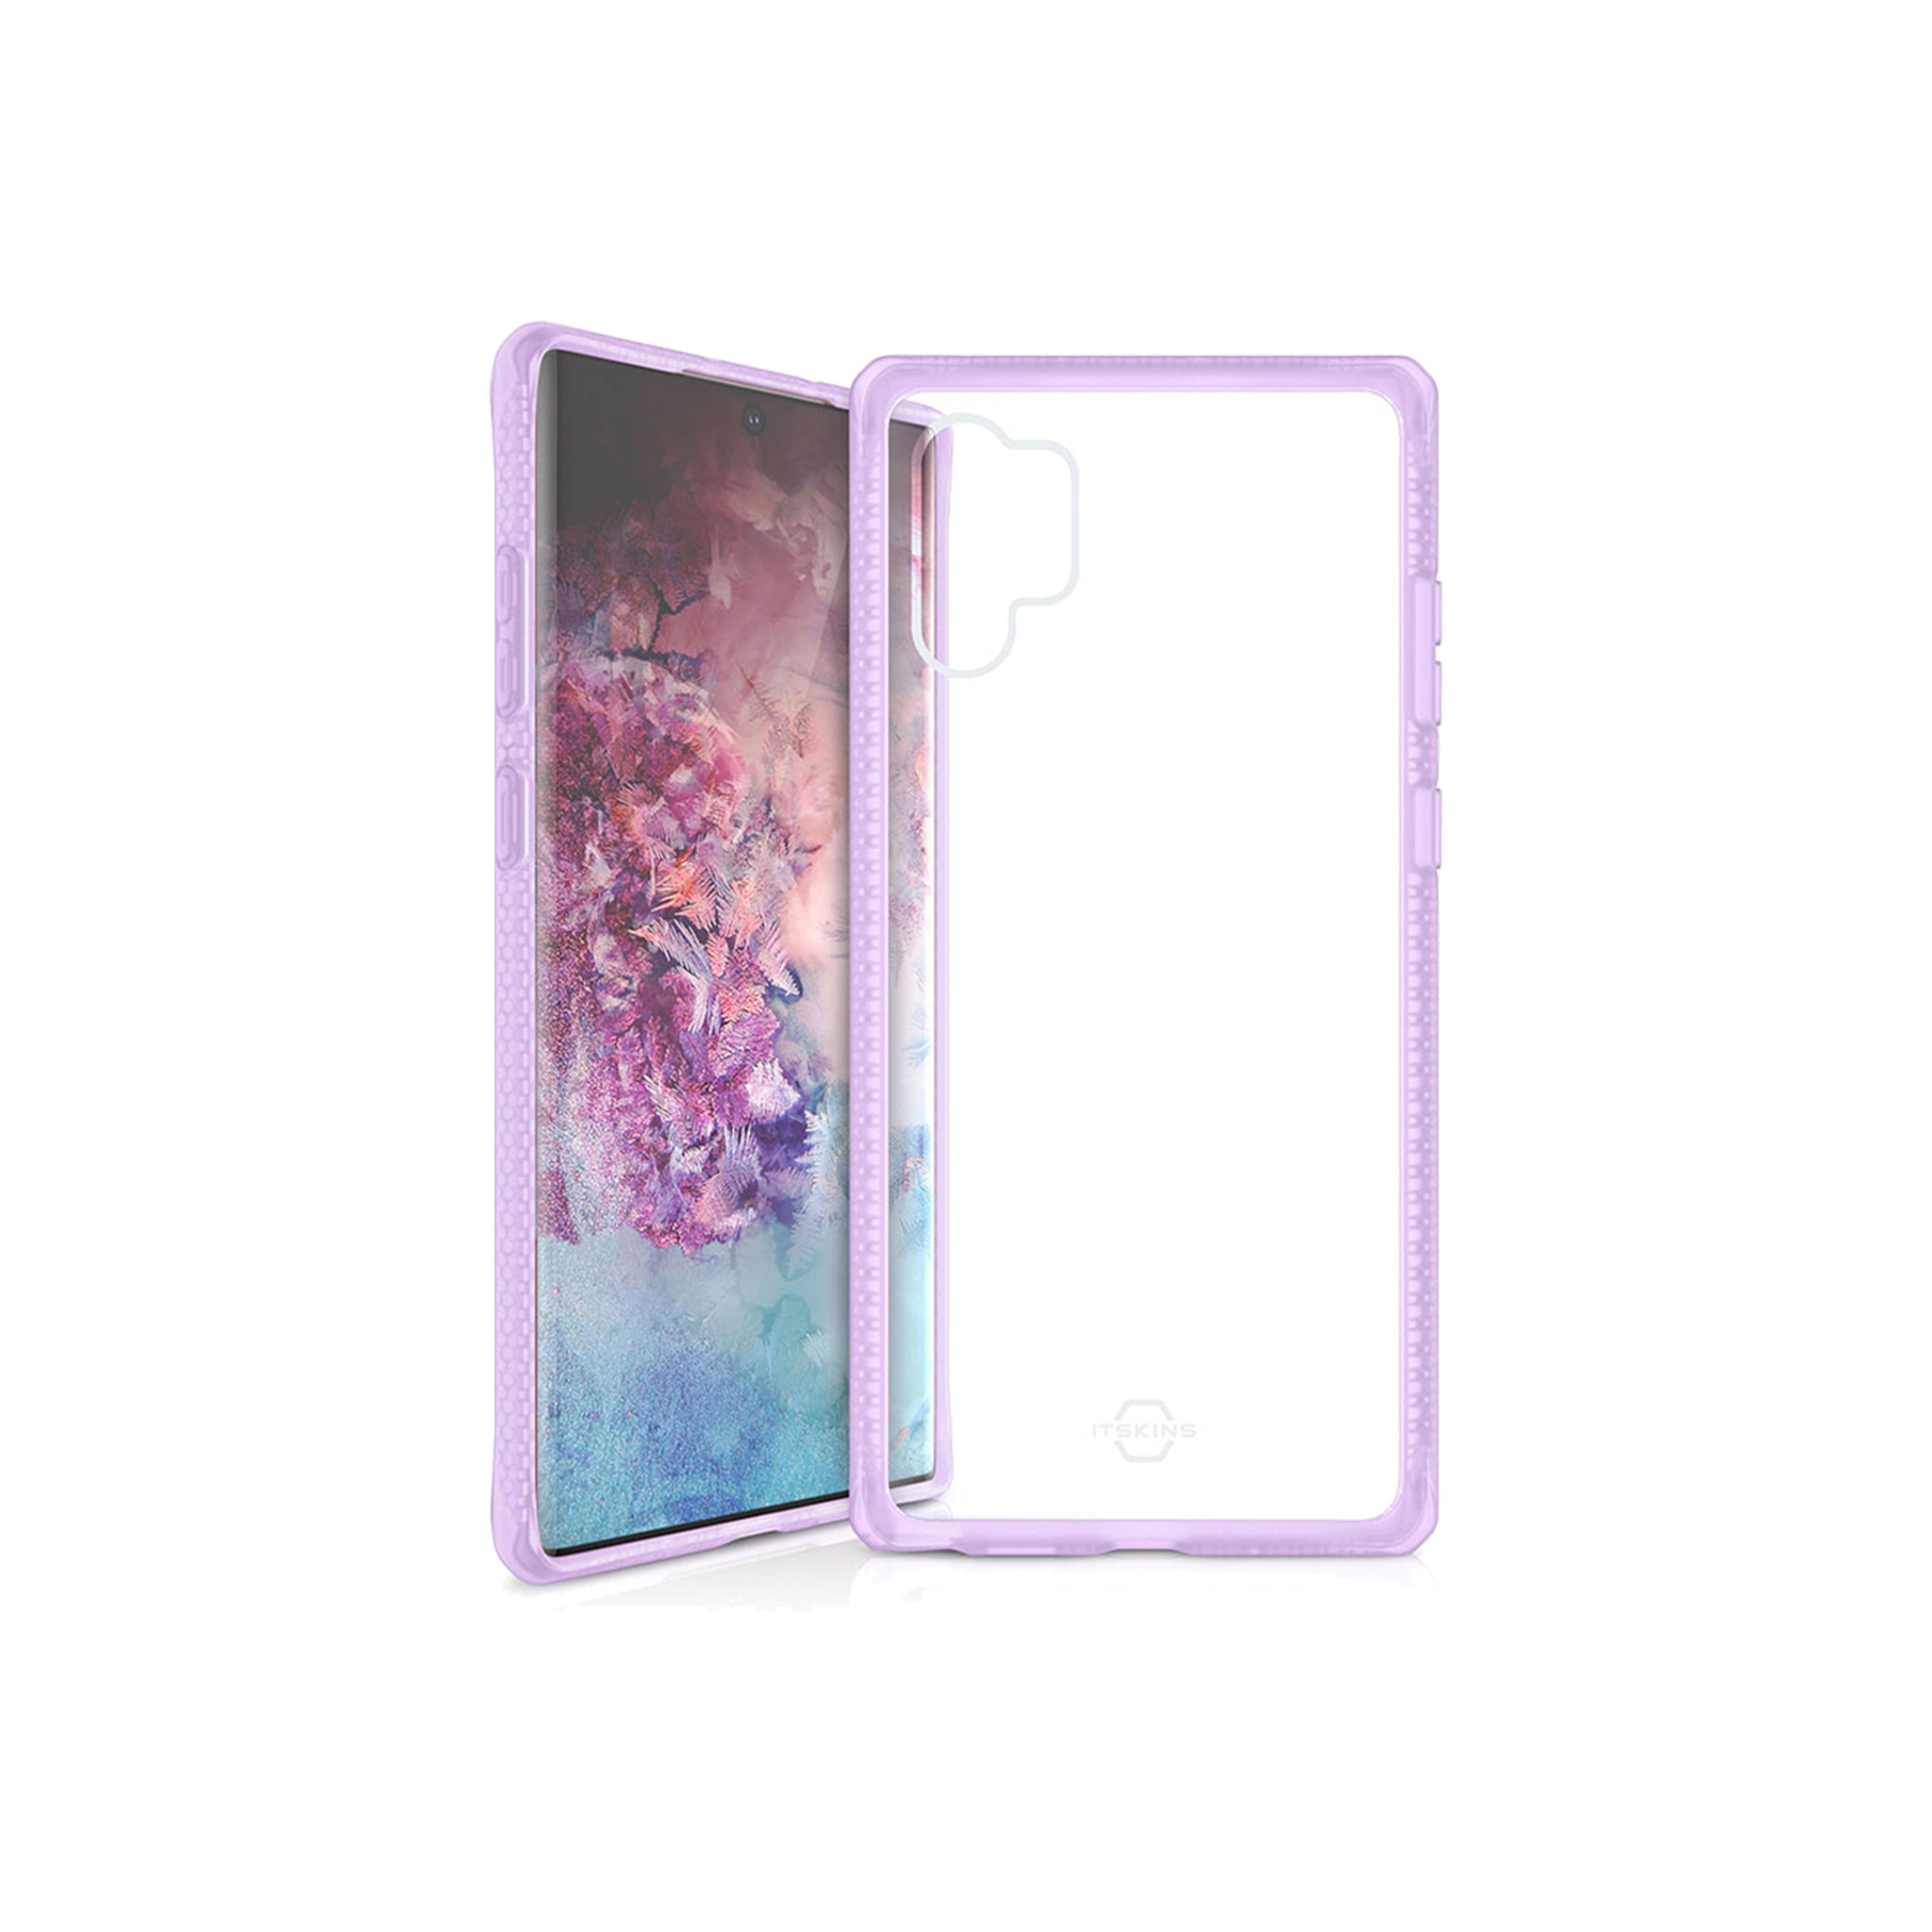 Itskins - Hybrid Frost Mkii Case For Samsung Galaxy Note 10 Plus - Light Purple And Transparent